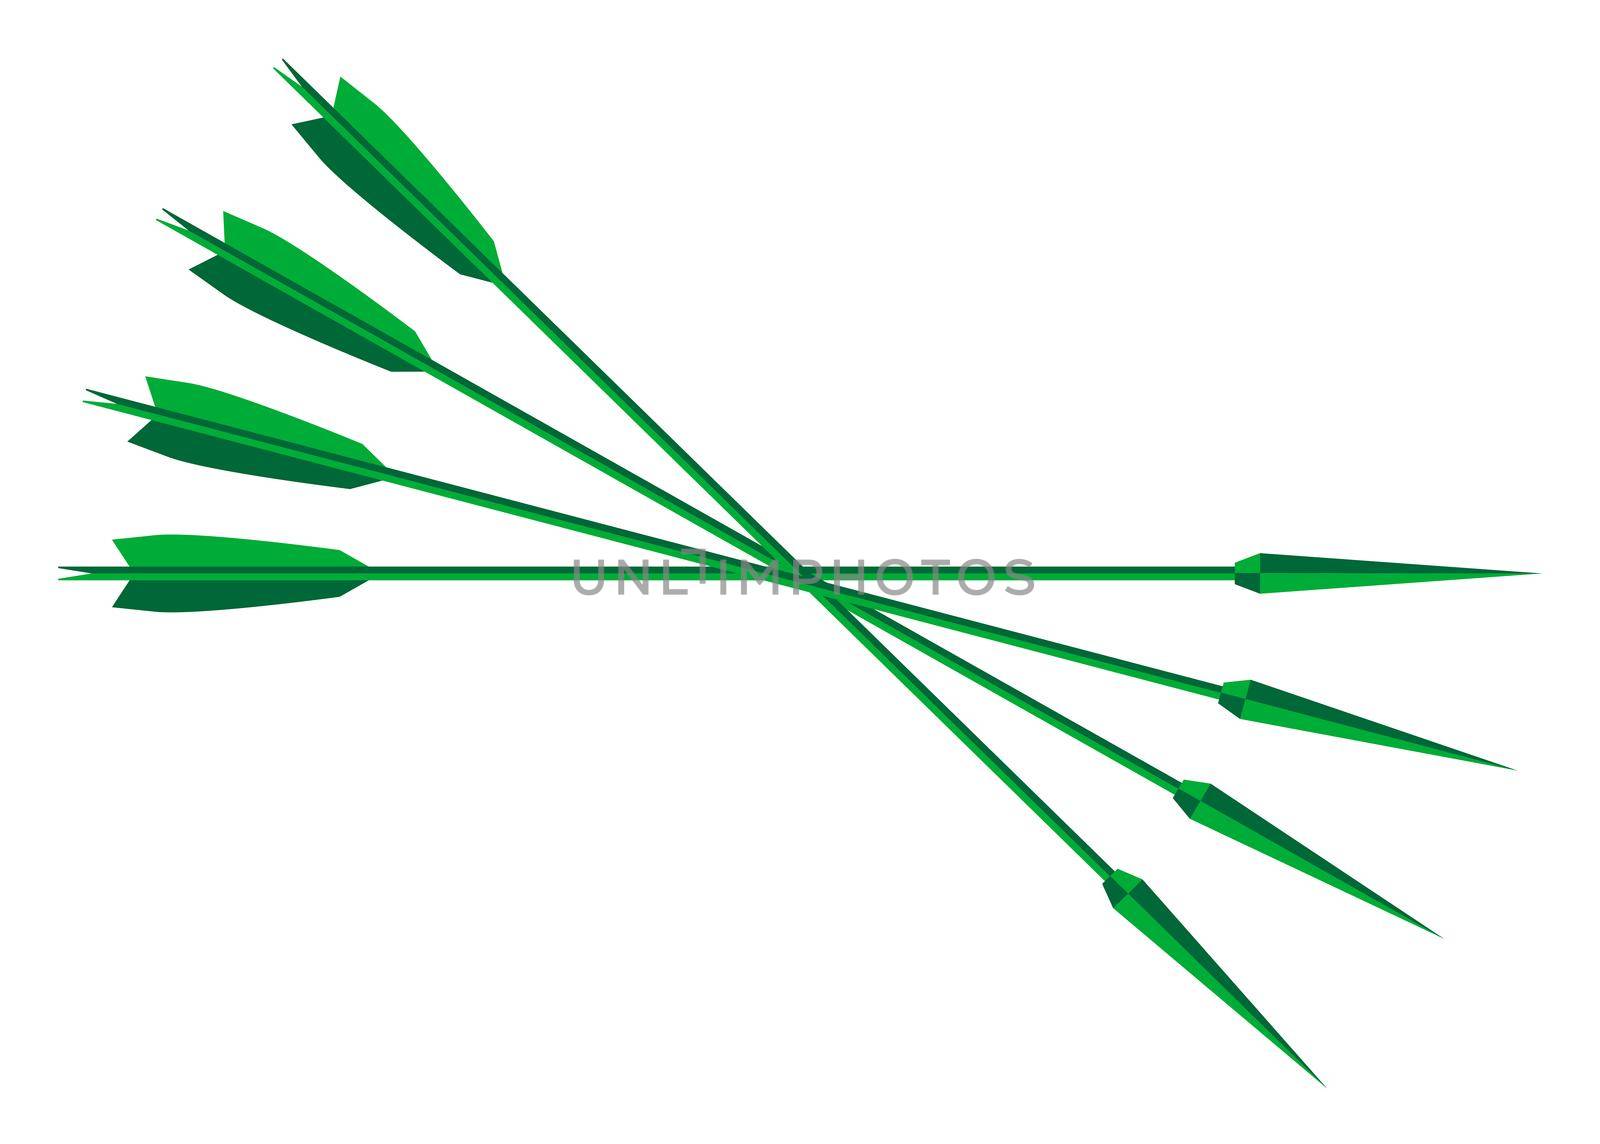 A stypical silhouette of the type of arrow as used by Robin Hood